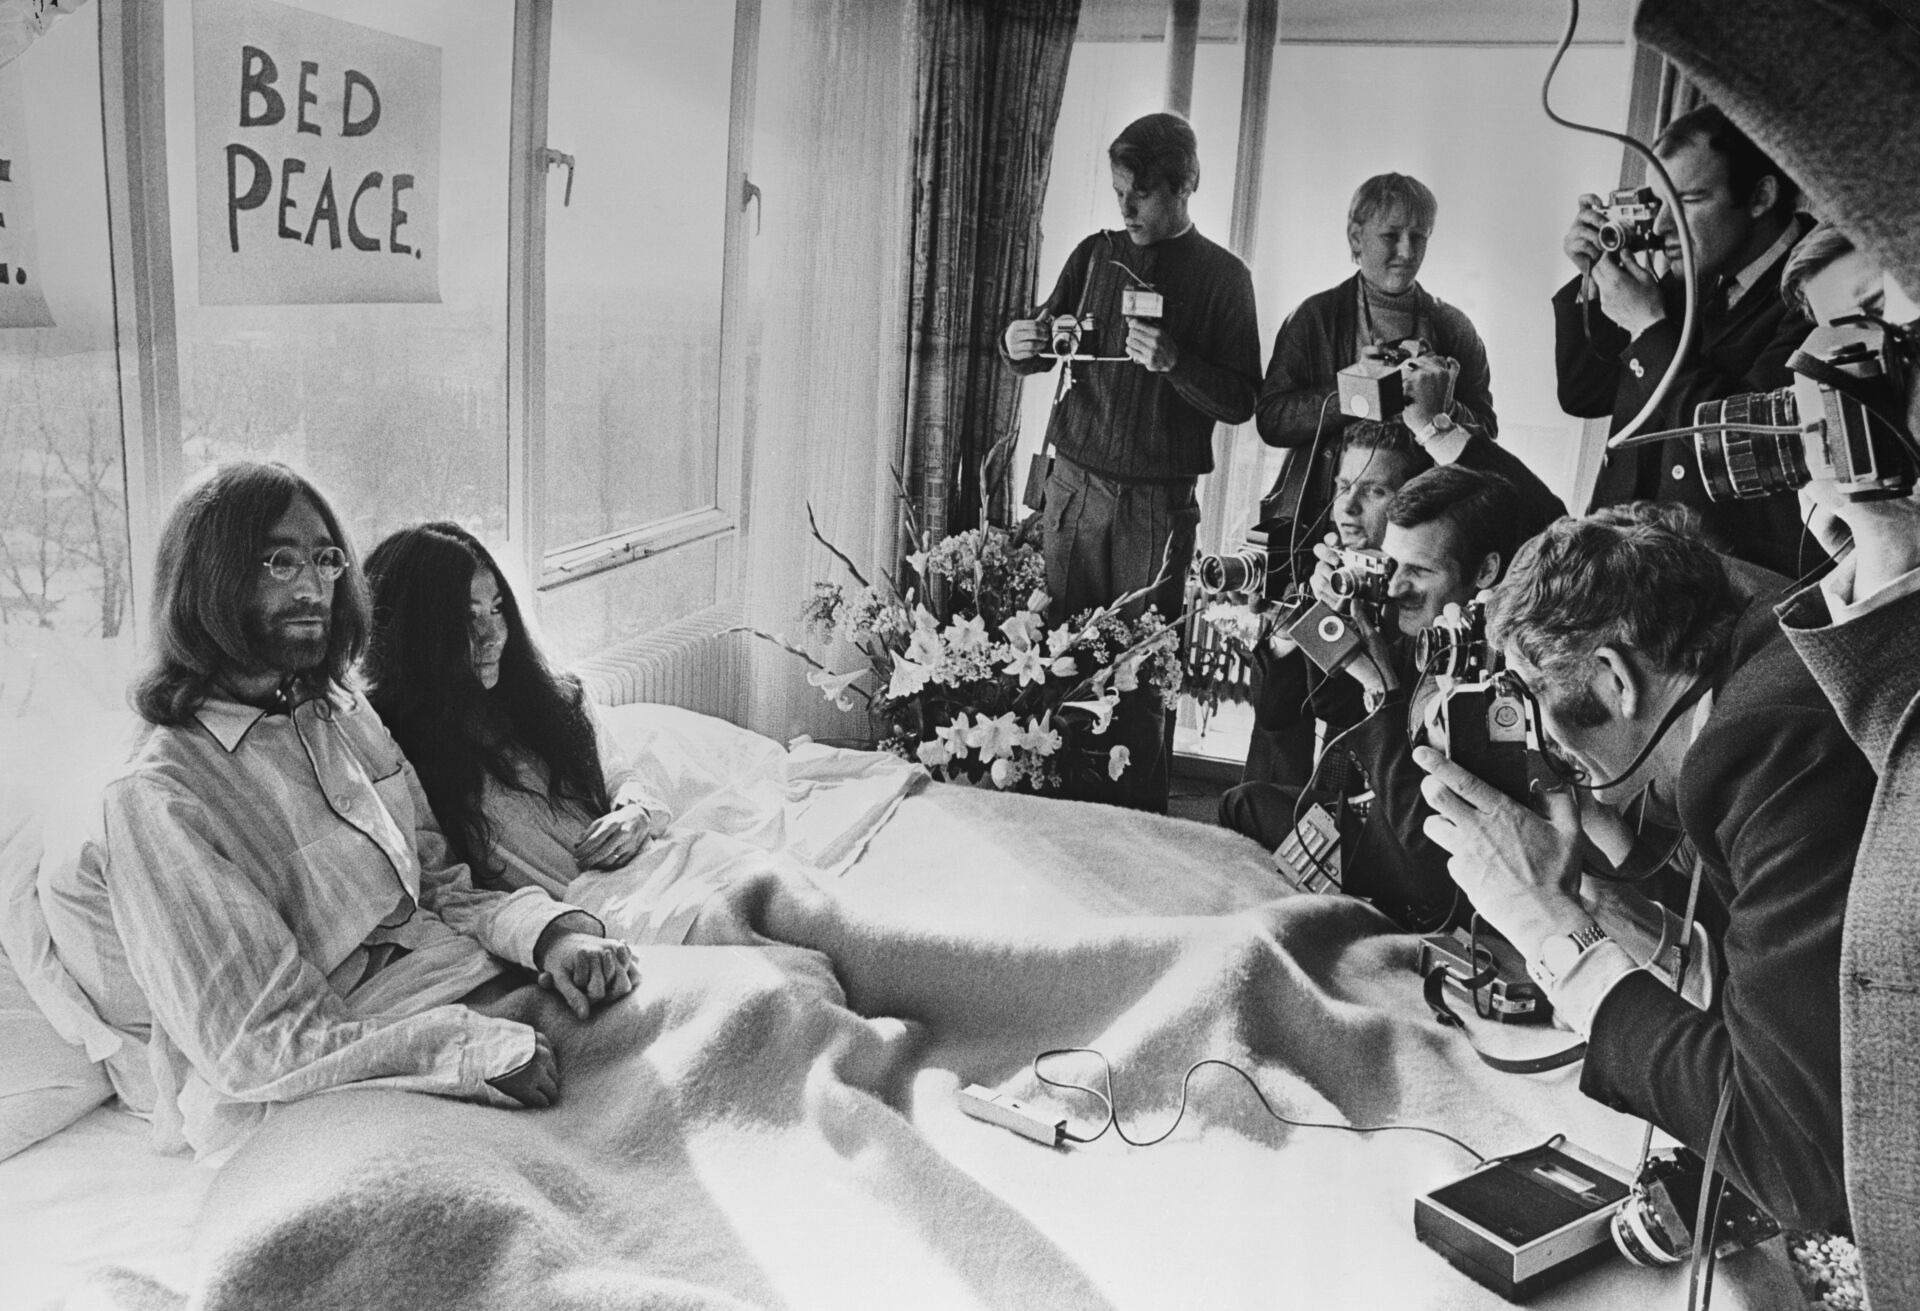 Yoko Ono and John Lennon, Bed-In for Peace, Amsterdam, 1969. Courtesy YO. Photo by Central Press/Getty Images via Tate Modern.